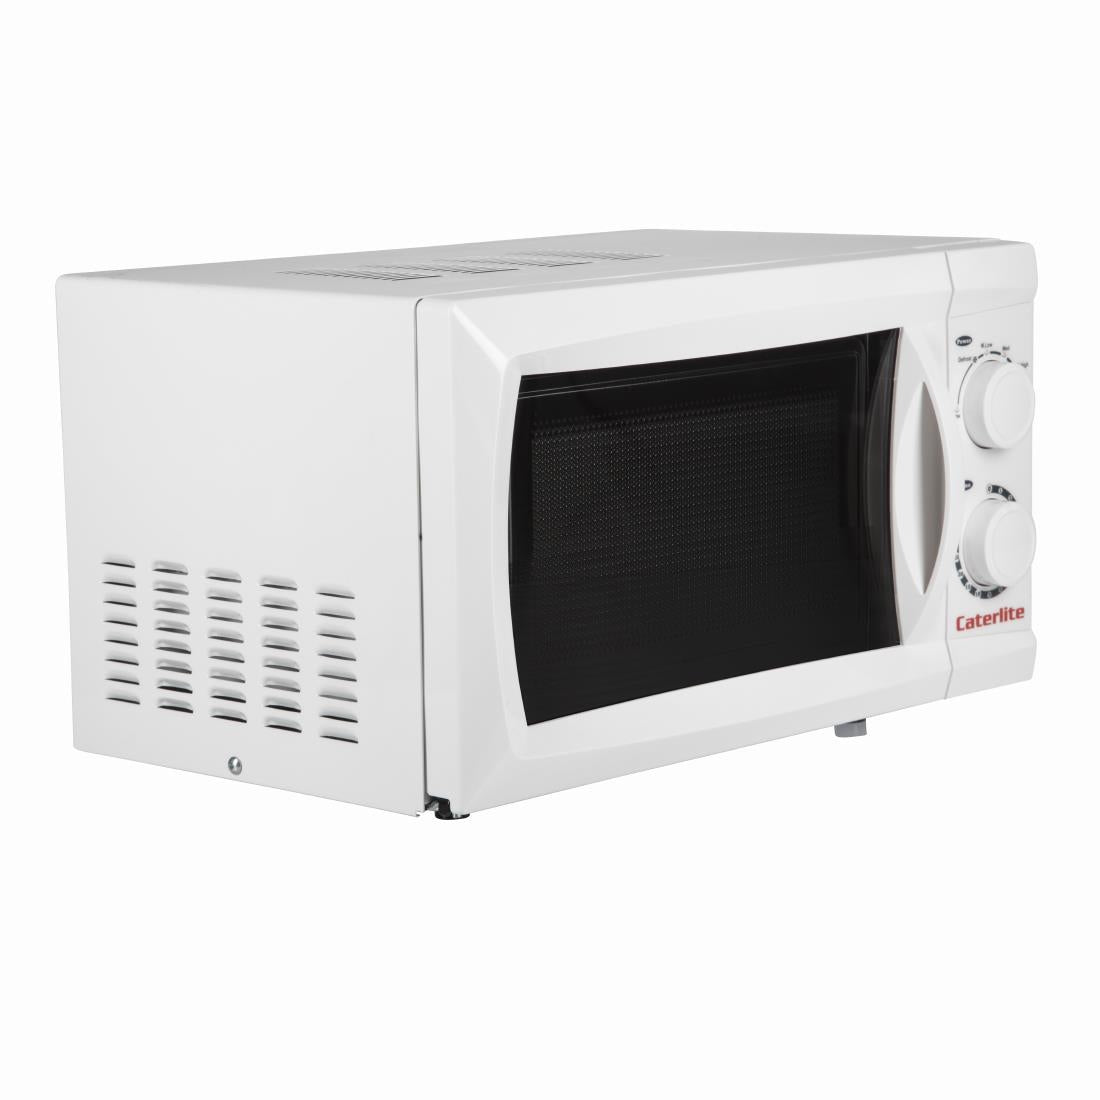 Caterlite Compact Microwave Oven 700W JD Catering Equipment Solutions Ltd